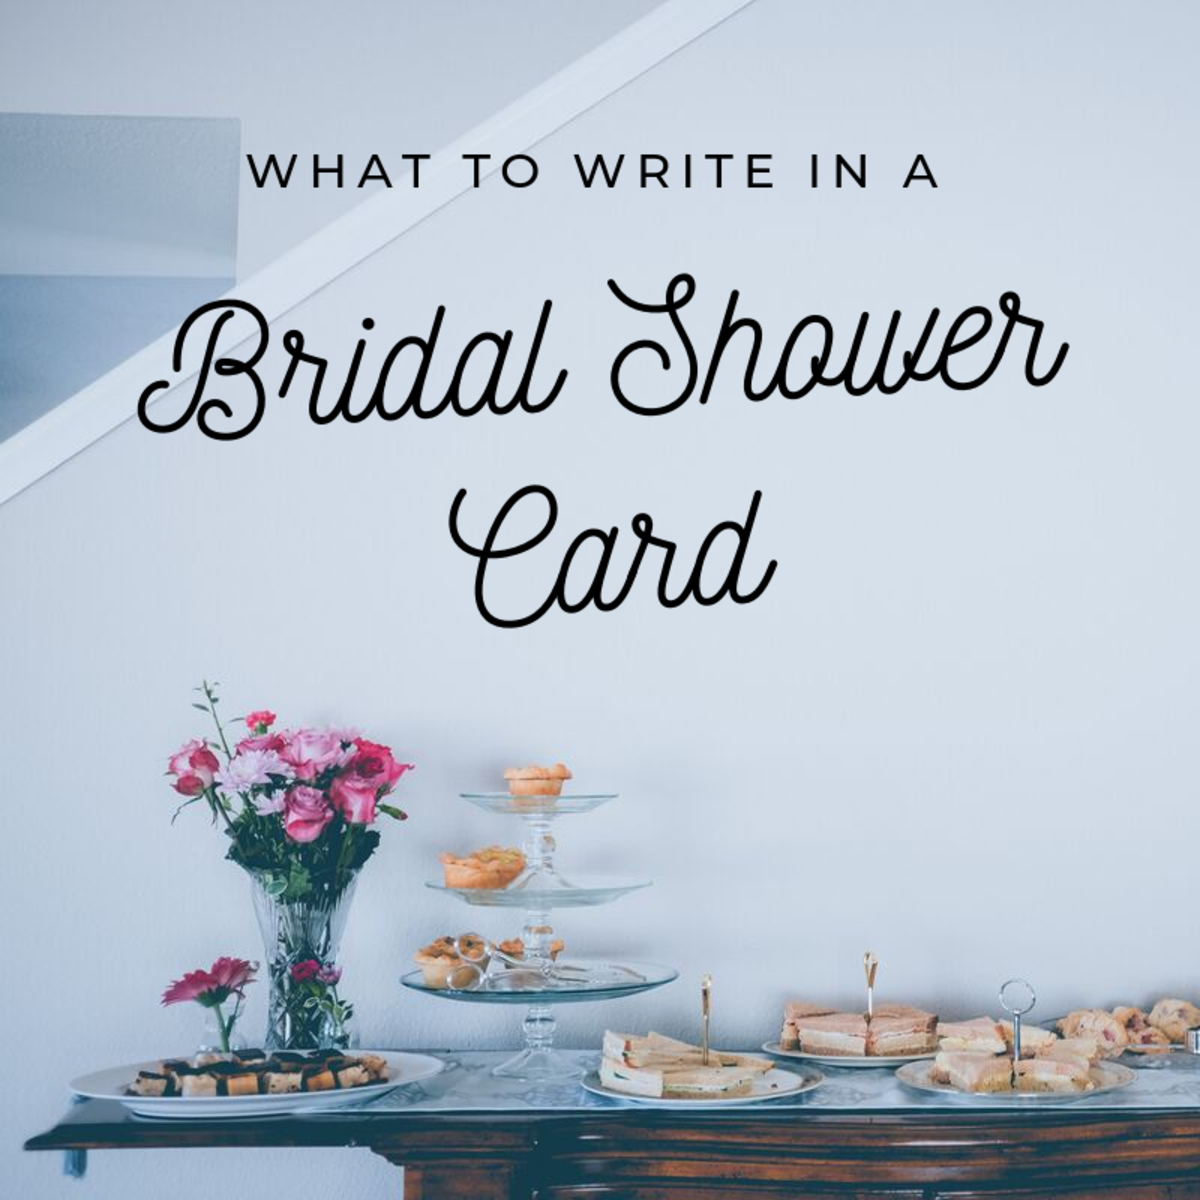 Example Bridal Shower Card Messages Holidappy